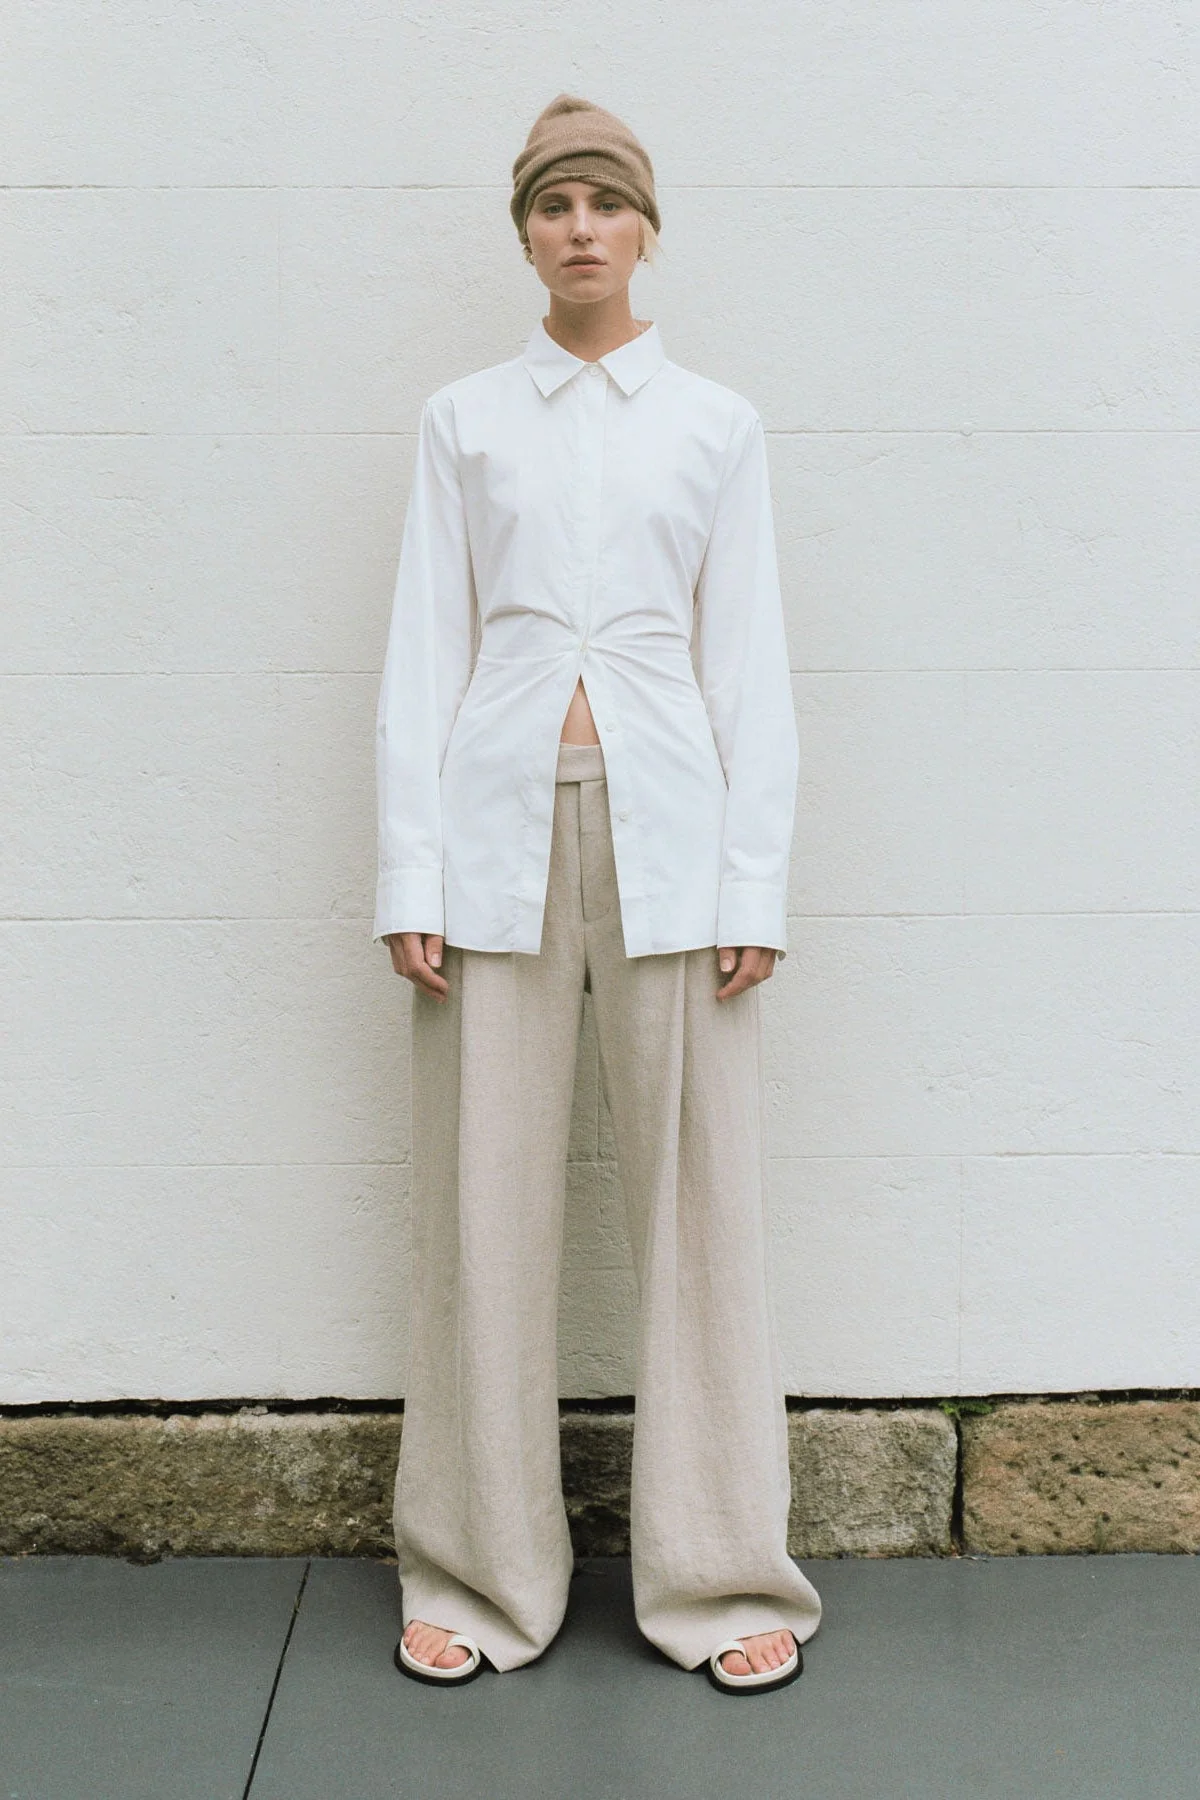 St Agni Linen Overlap Trouser in Natural available at The New Trend Australia.